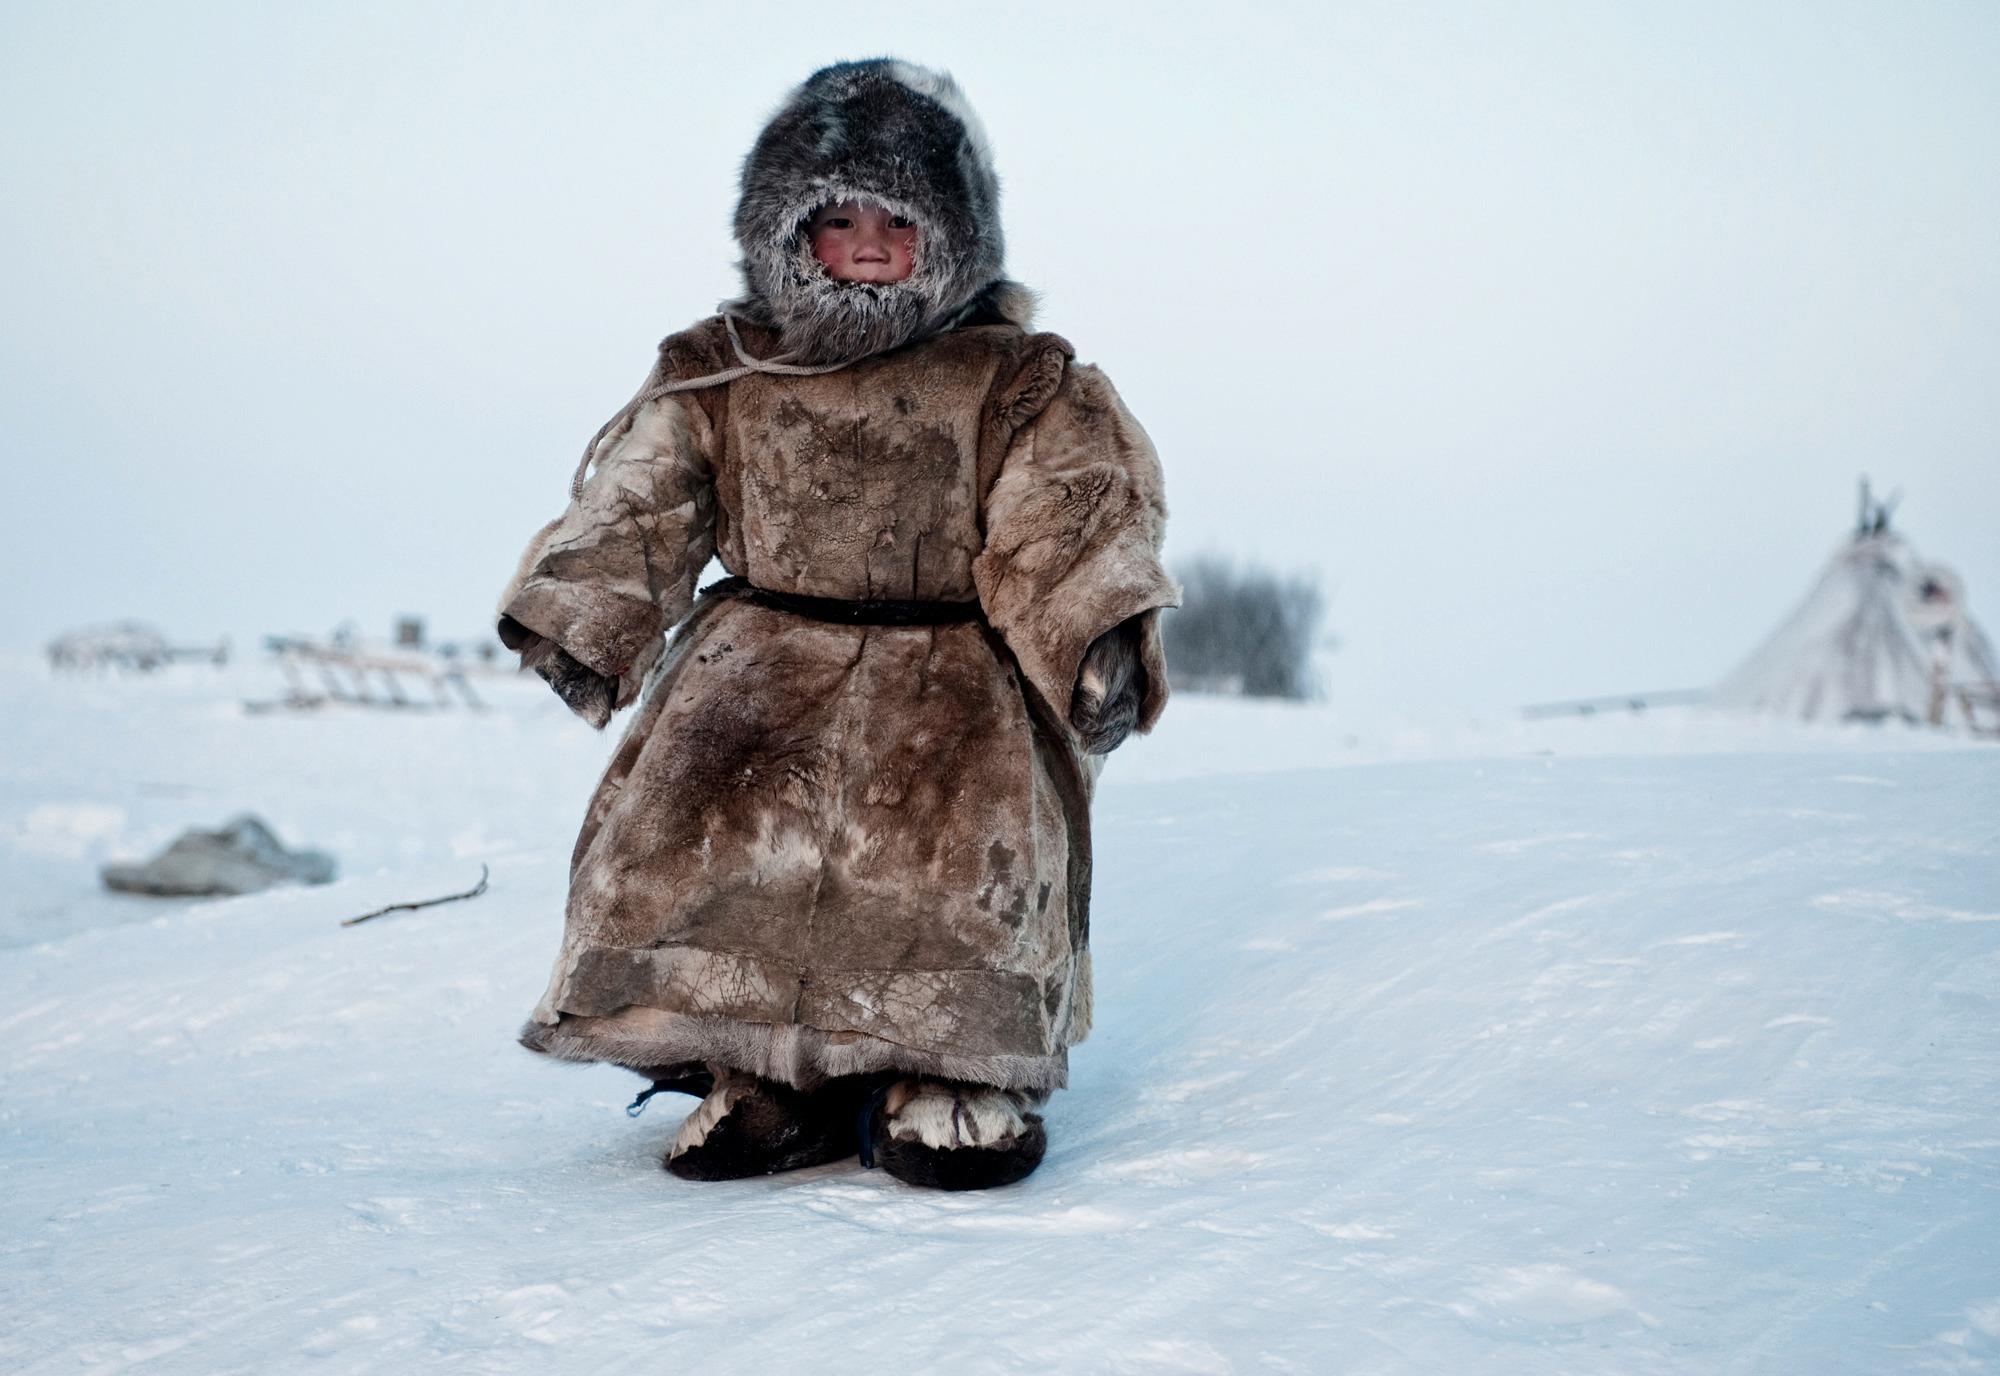 A Young Nenets boy plays in -40 degrees on Yamal in the Winter in Siberia. Foto: Simon Morris, United Kingdom, Shortlist, Smile, Open, 2015 Sony World Photography Awards